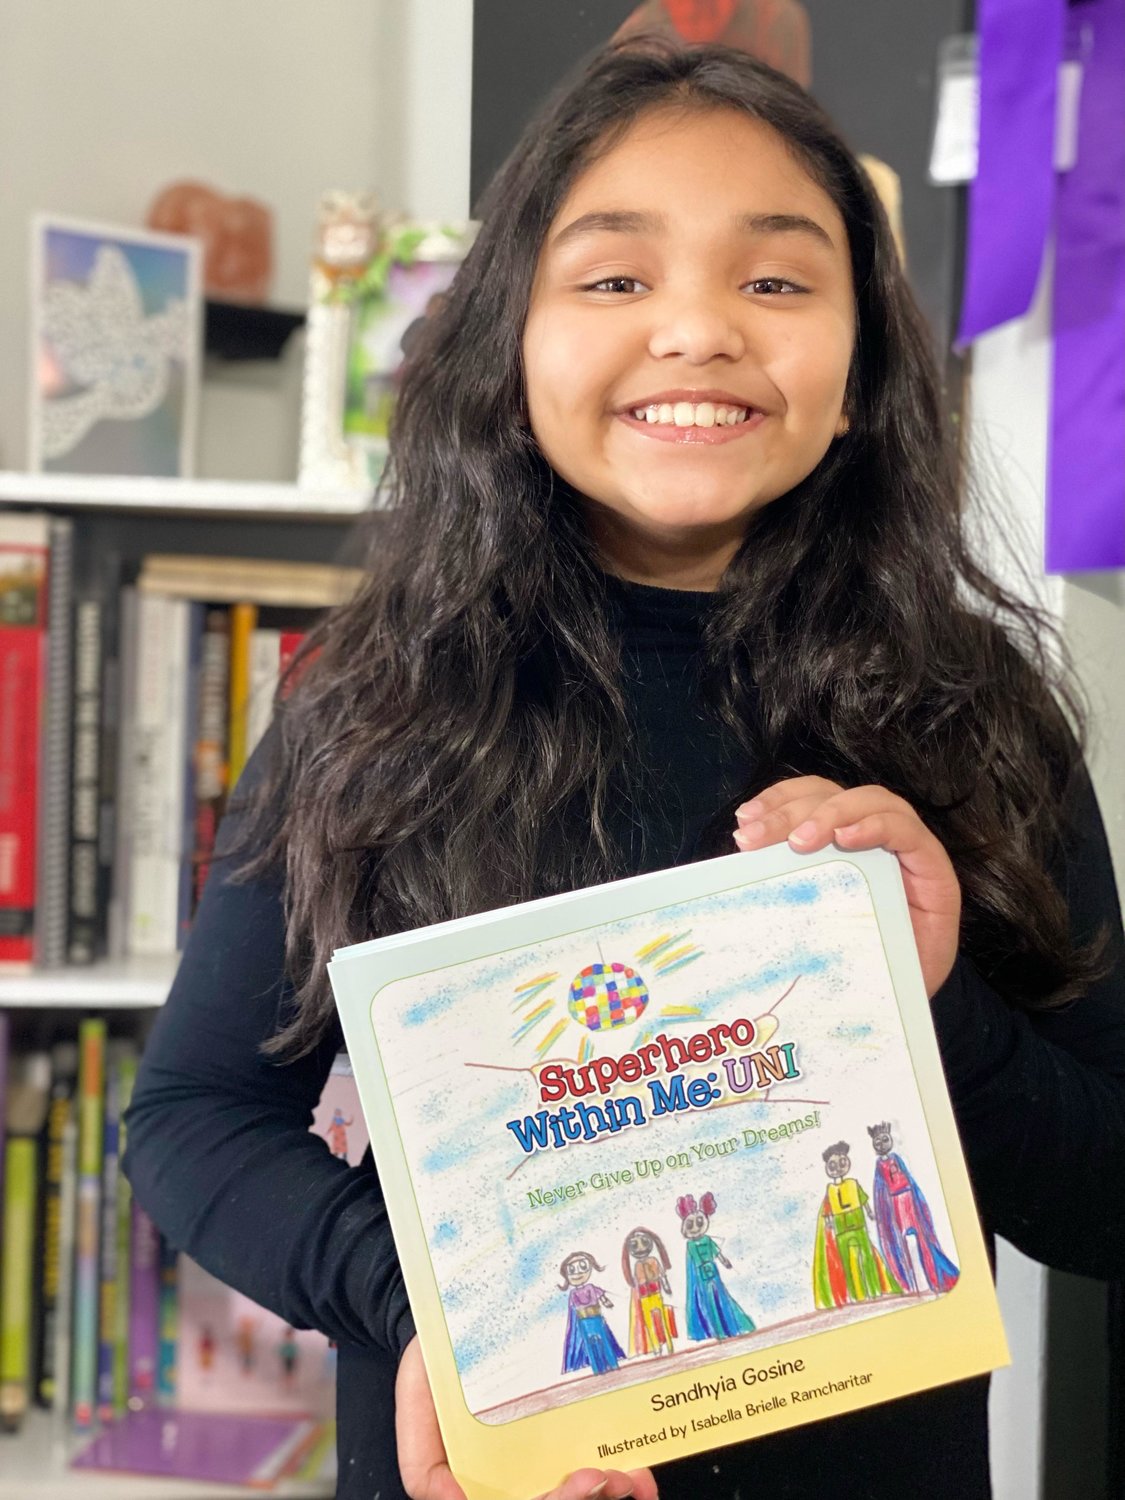 Isabella Brielle Ramcharitar became a mini-celebrity at Steele Elementary School when she was able to read her book to her class, also achieving their “book of the month.”